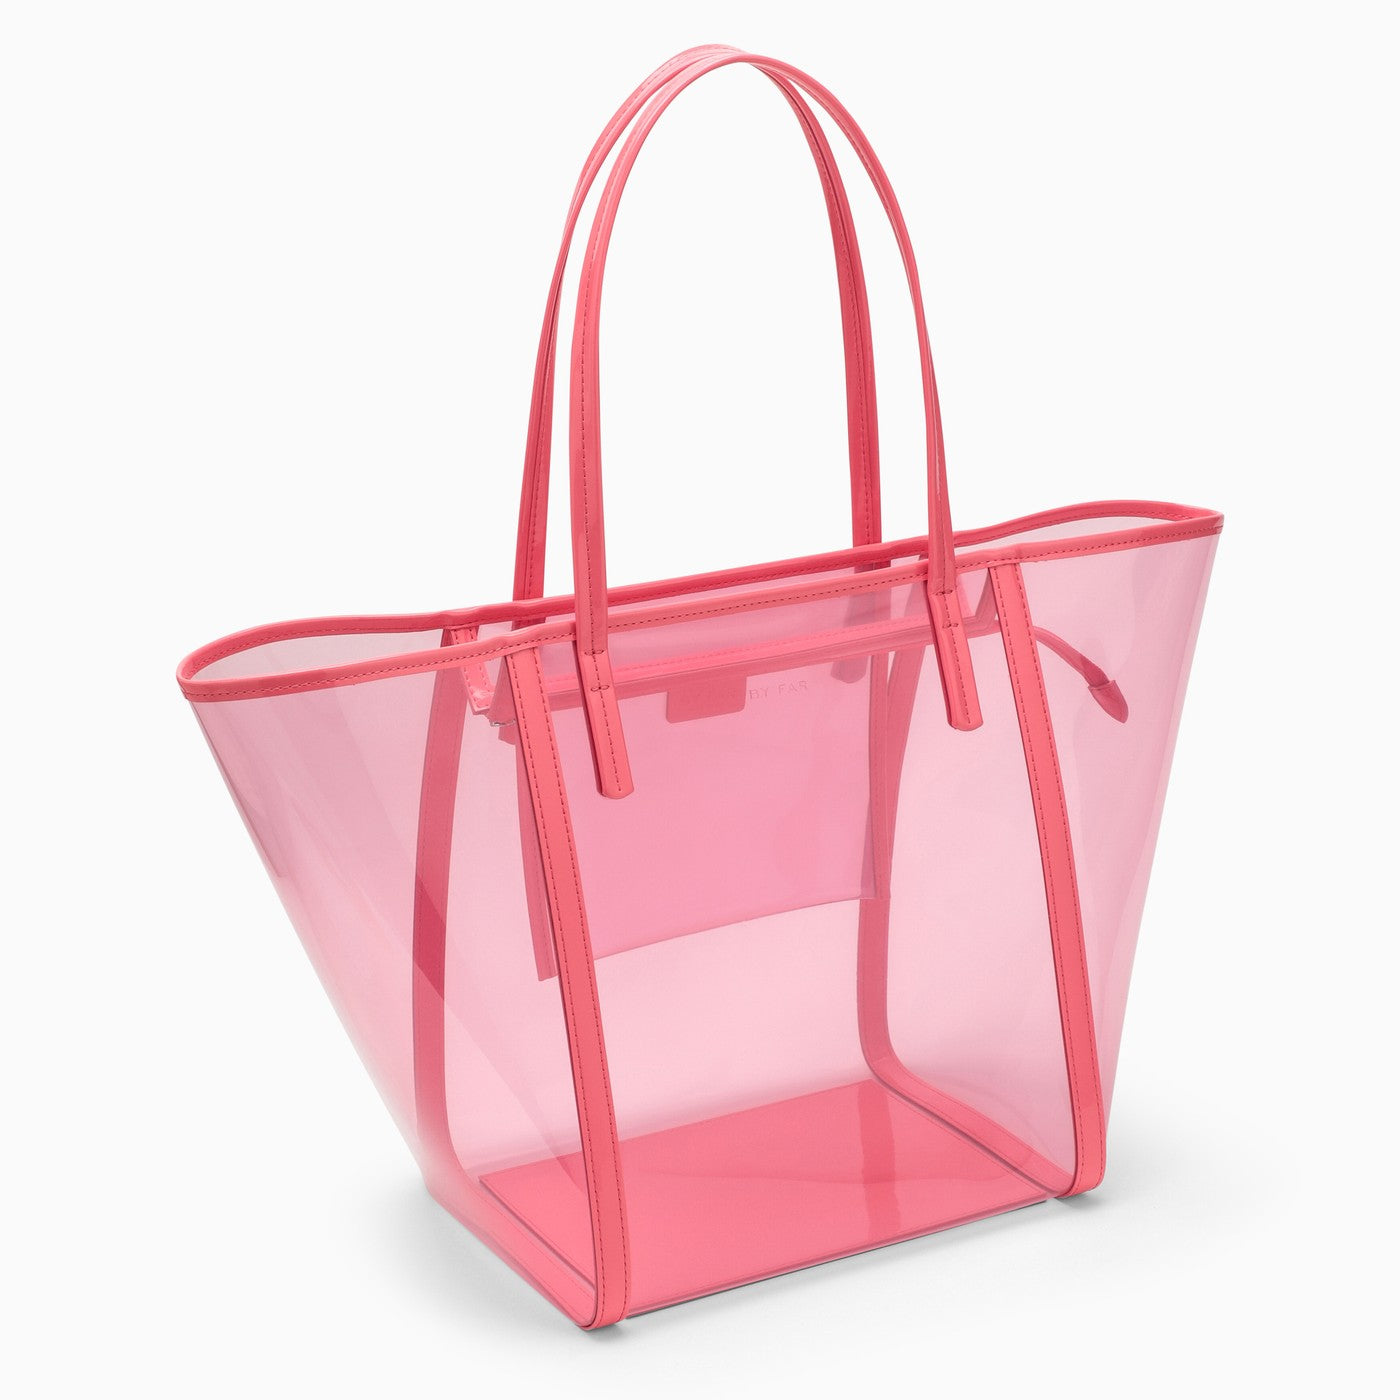 BY FAR - Club Translucent Tote Bag in Pink By Far